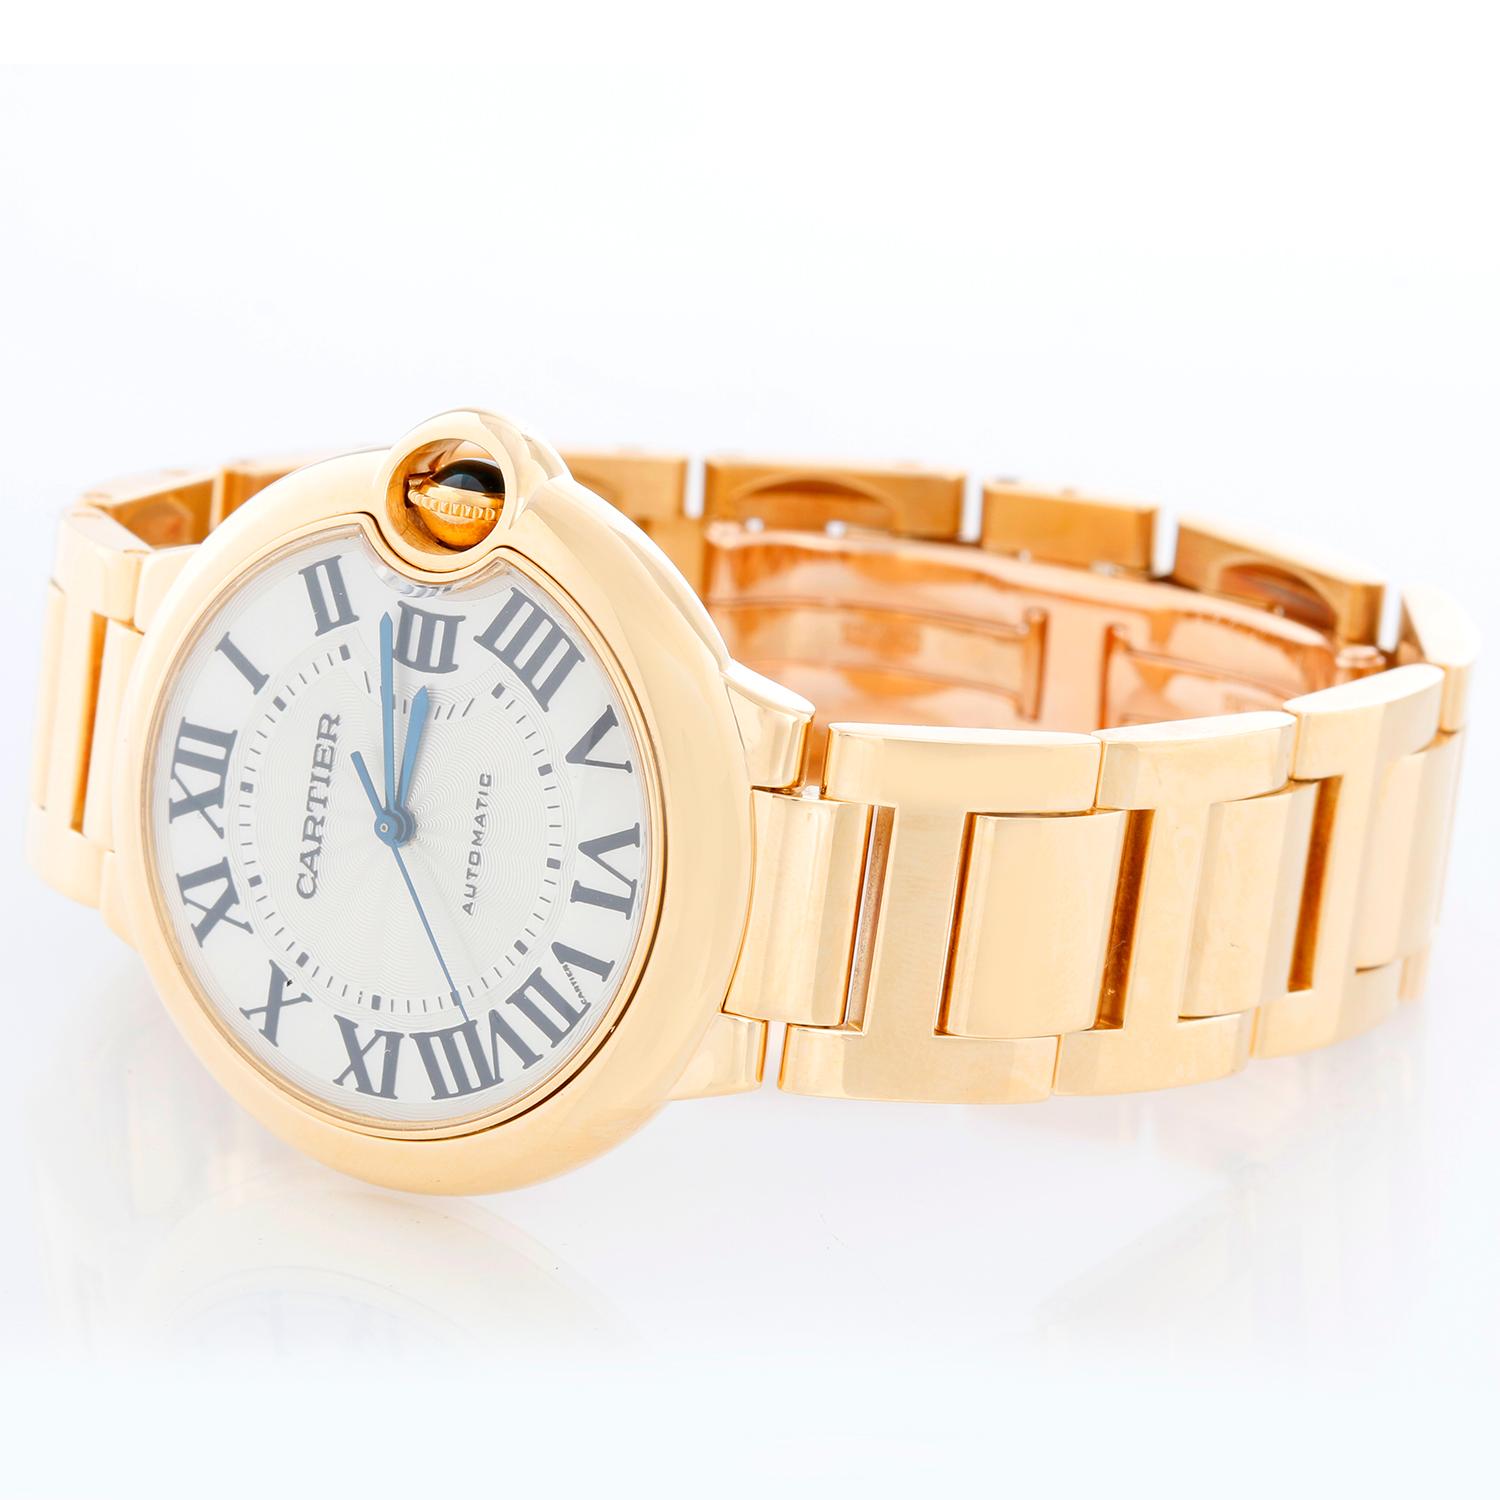 Cartier Ballon Bleu Midsize 18k Yellow Gold Watch WE902027 - Automatic winding. 18k yellow gold case (36 mm). Silver guilloche dial . 18k yellow gold Cartier bracelet with deployant clasp. Pre-owned with Cartier box .